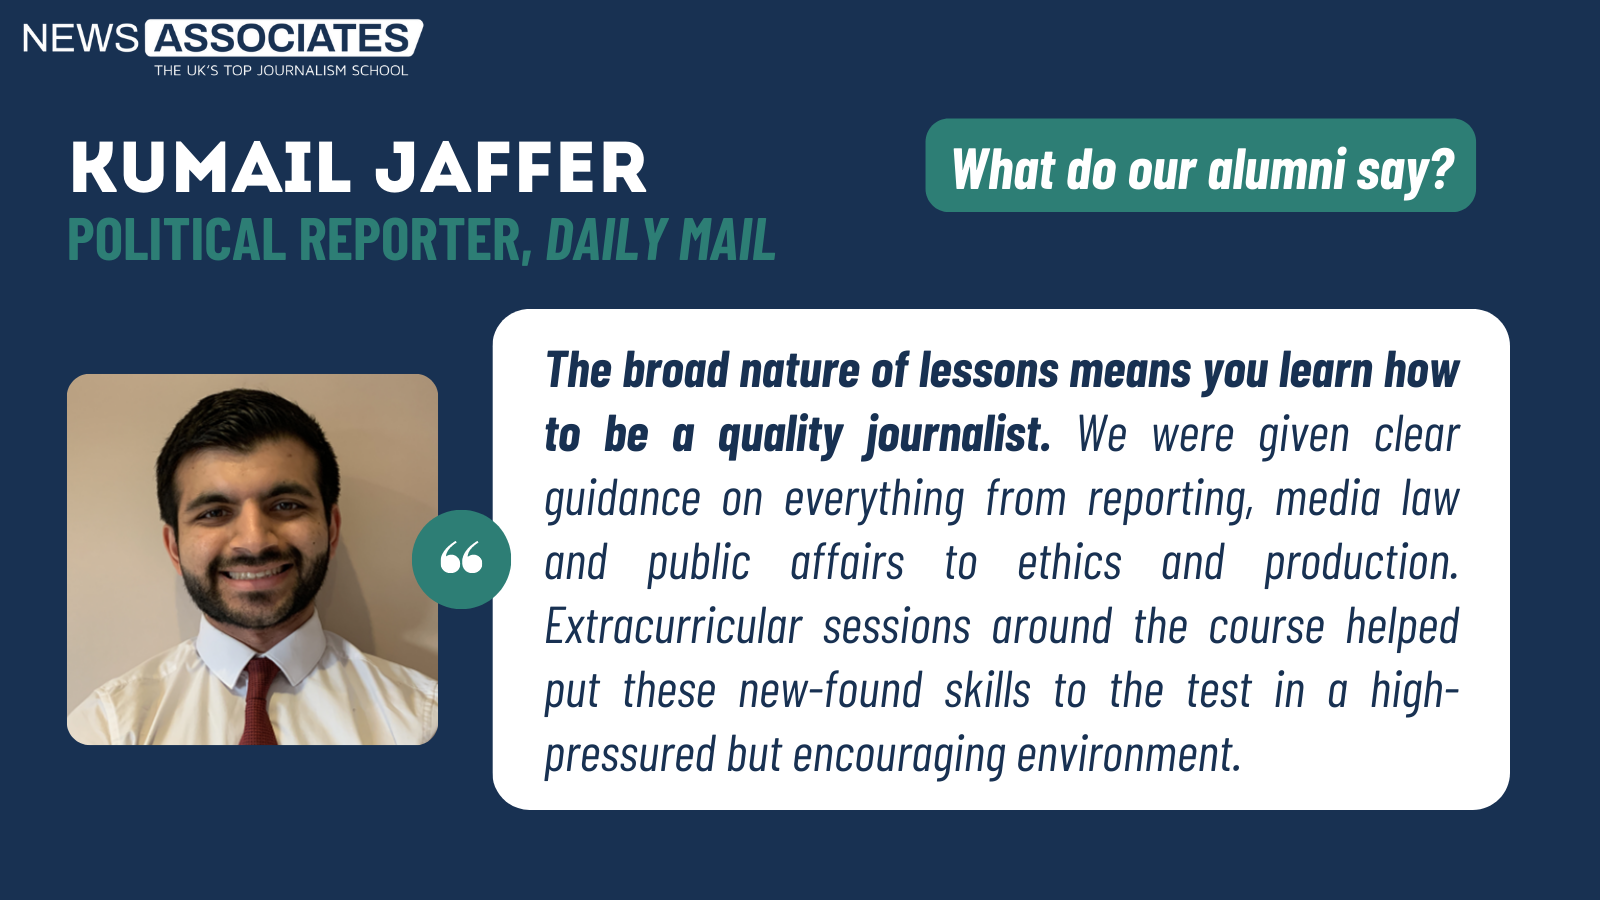 A testimonial from Kumail Jaffer praising the quality teaching and encouraging environment at News Associates. 